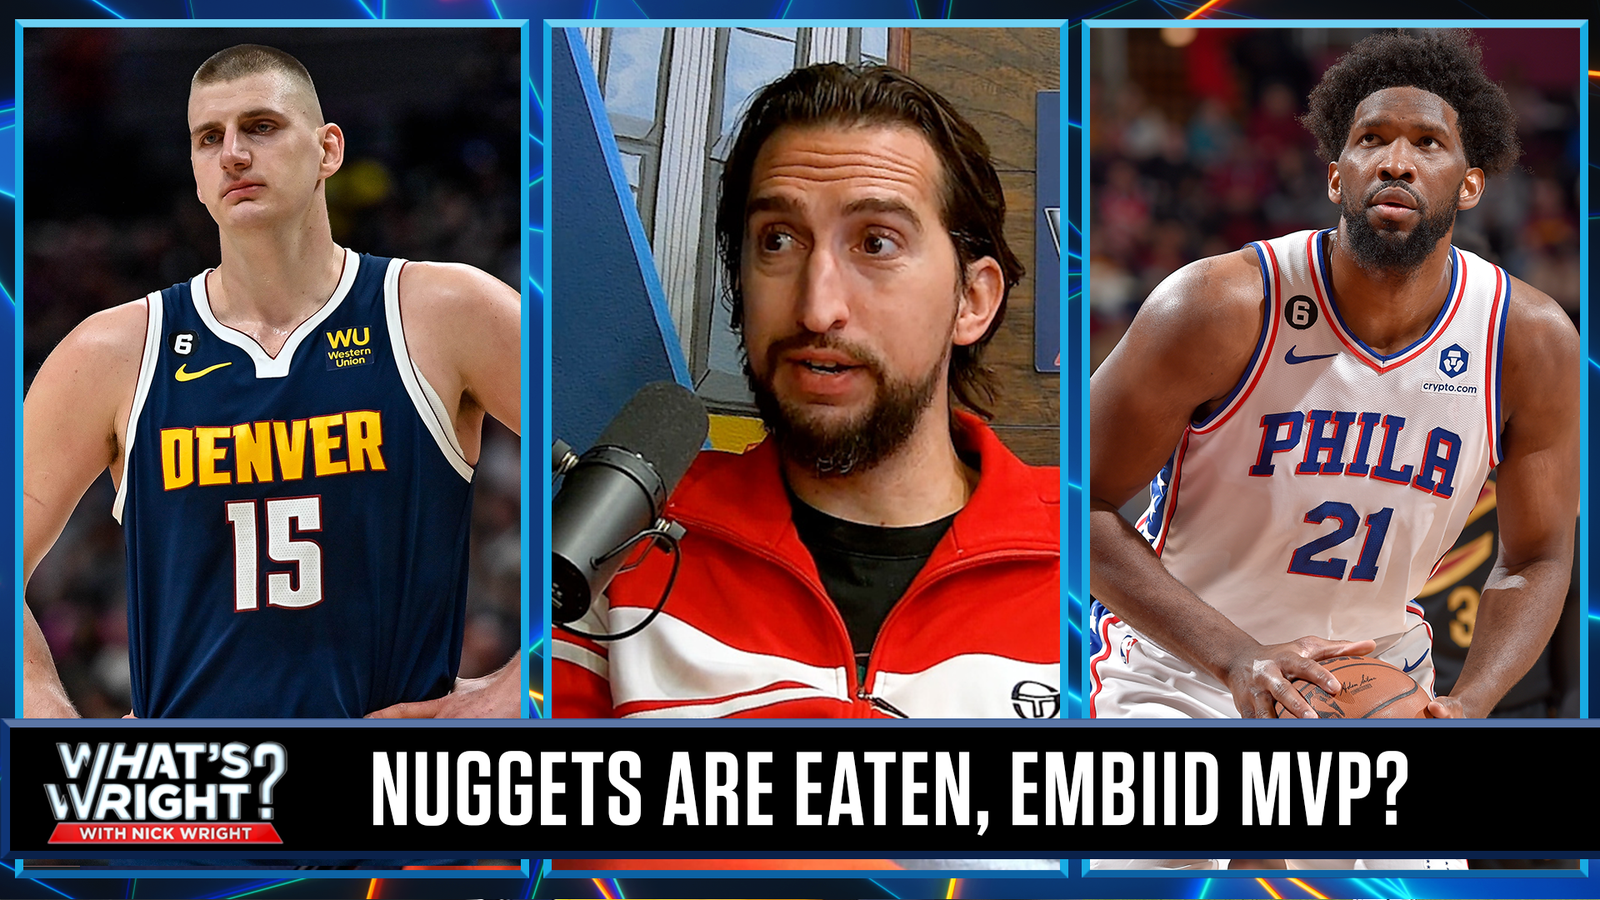 Time for Nuggets to freak out as Joel Embiid becomes new MVP favorite over Nikola Jokić